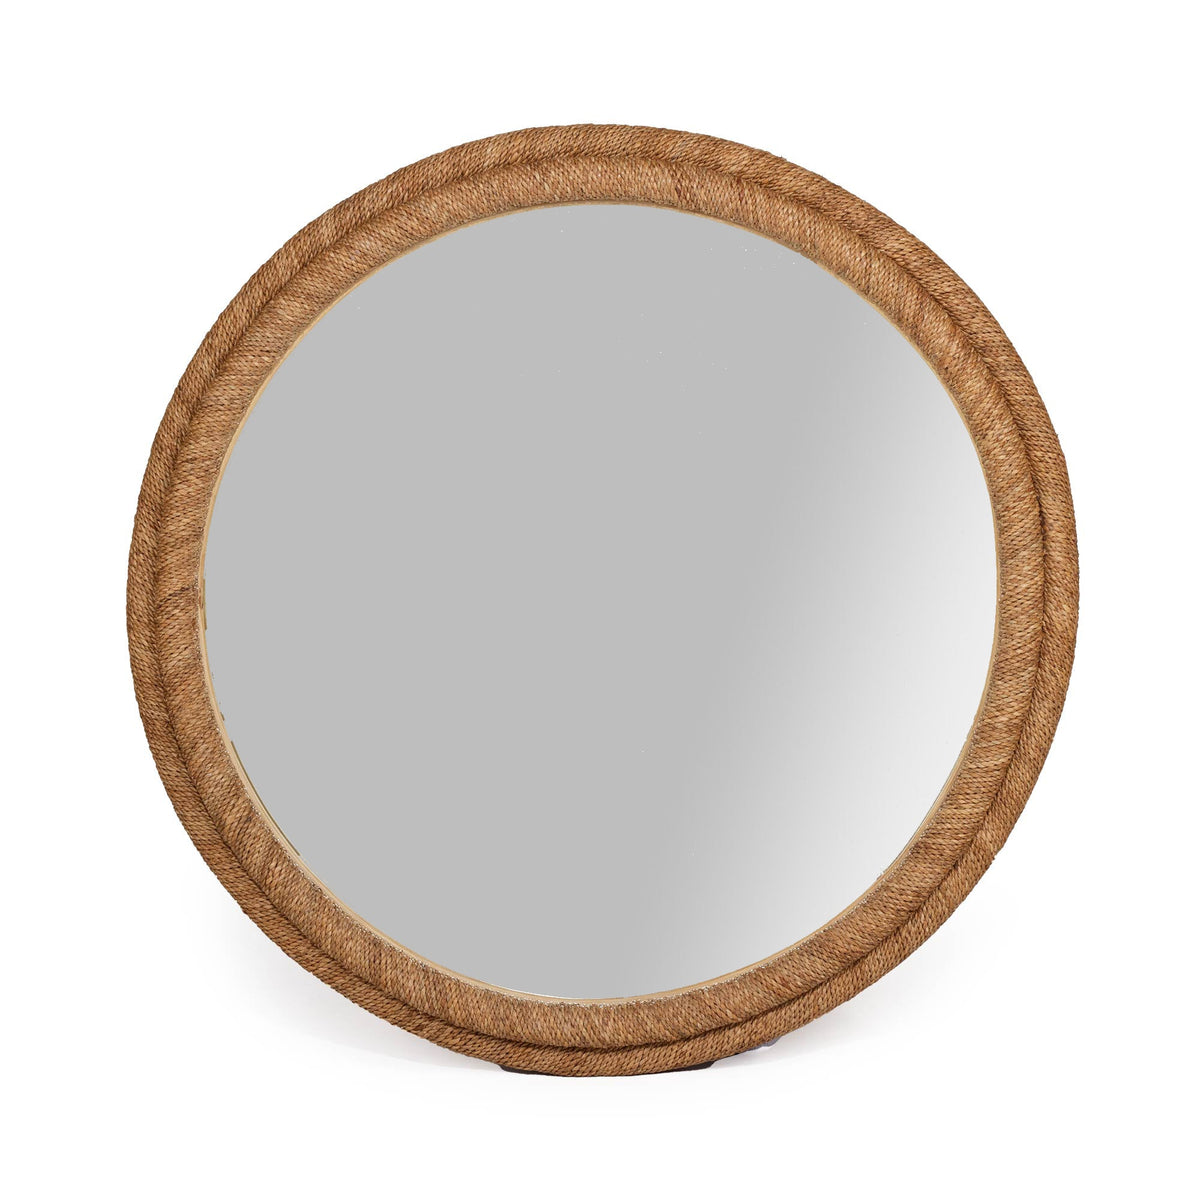 Chloe Rope Frame Round Wall Mirror, Quad Rope, 90cm - Natural